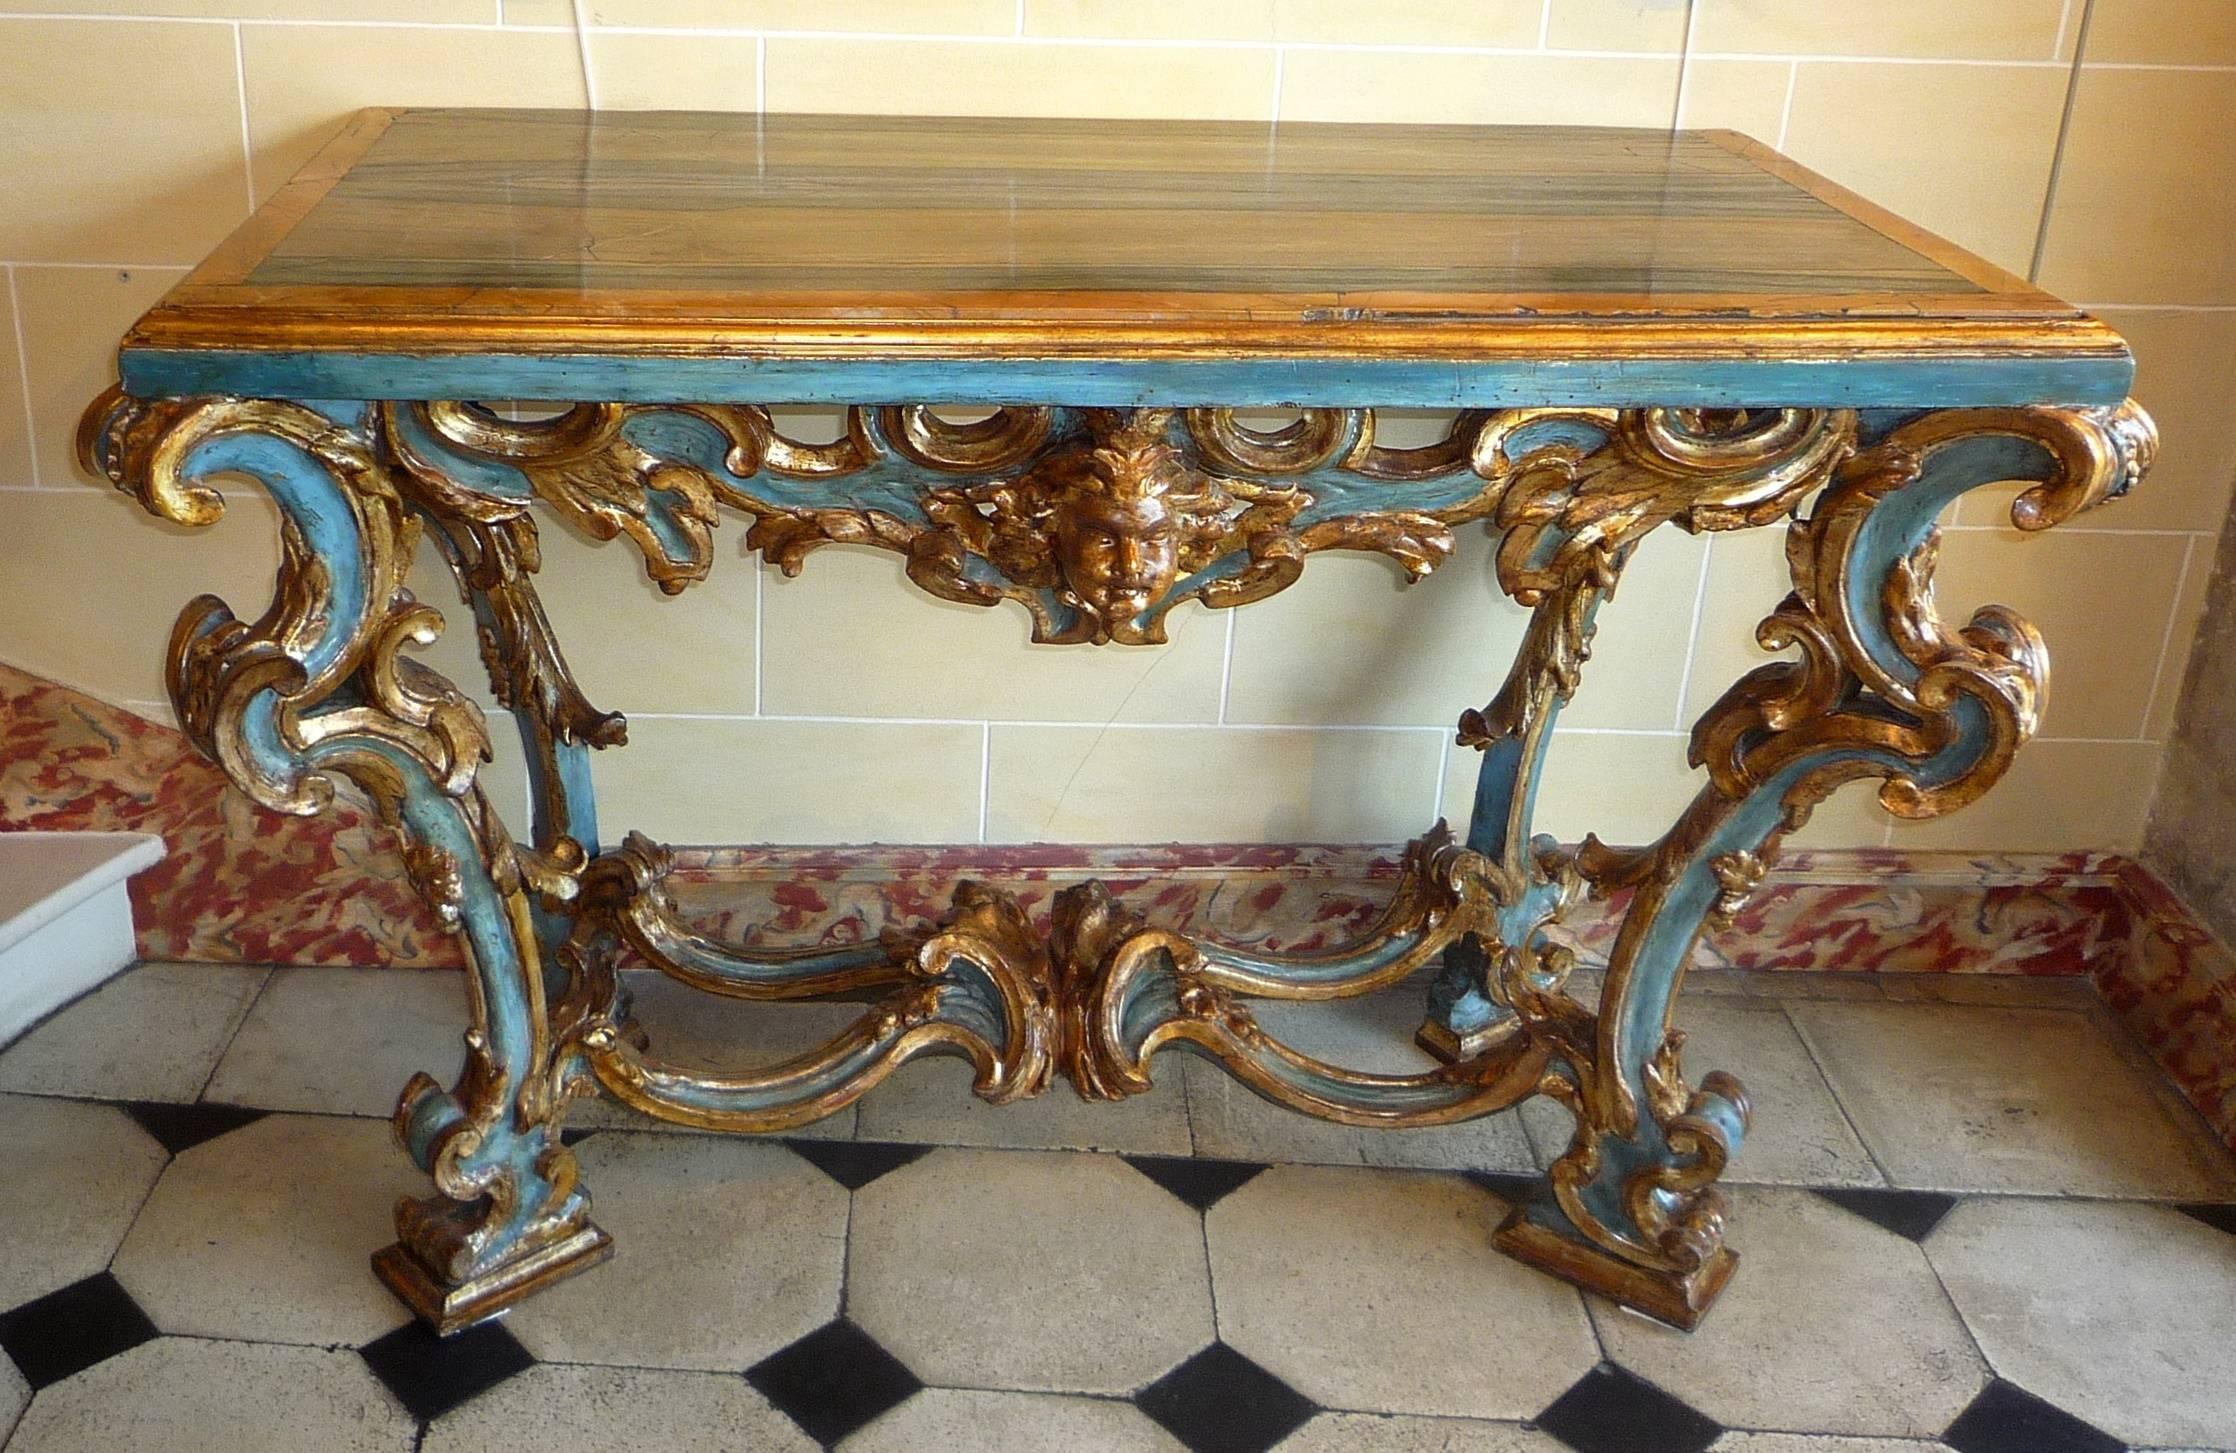 Italian 18th Century Baroque Roman Painted and Gilt Carved Wood Console Table